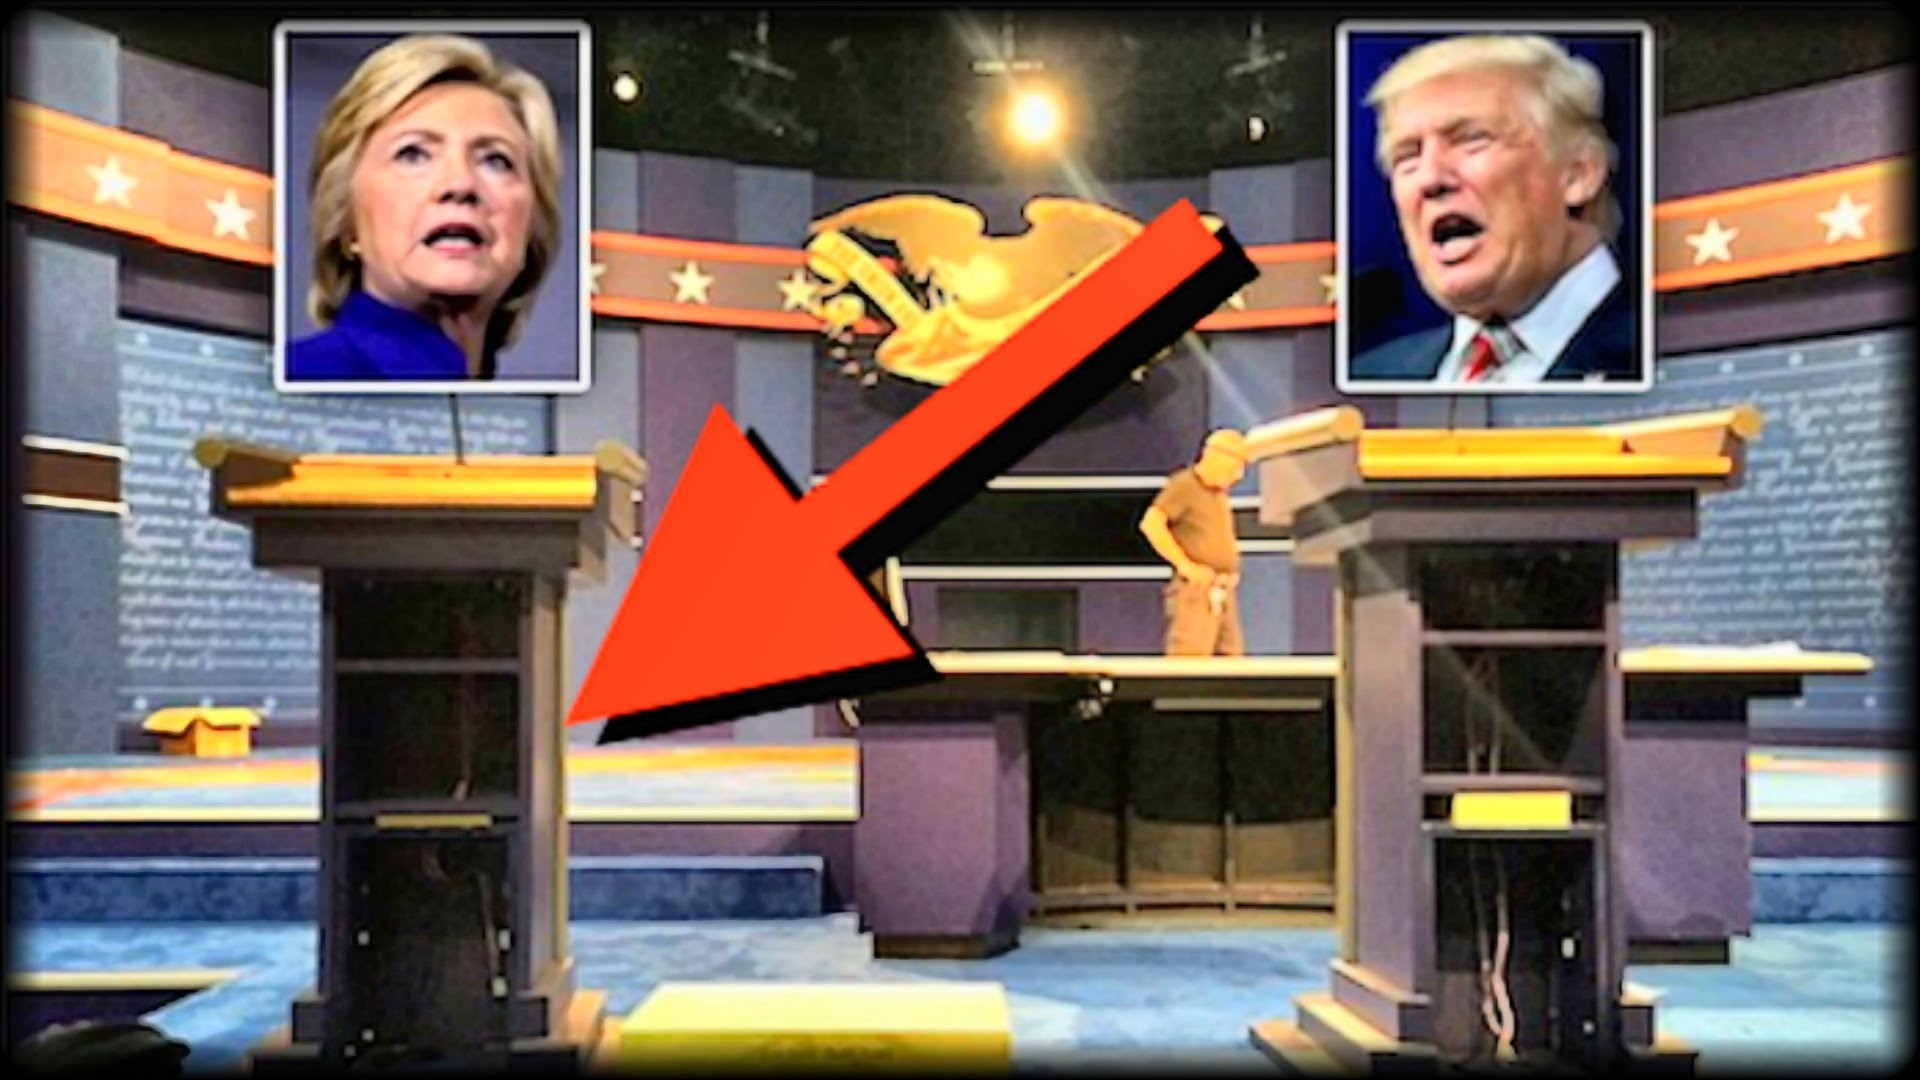 1920x1080 BREAKING: EVERY AMERICAN JUST NOTICED SOMETHING HUUUUGE ABOUT HILLARY  CLINTON'S DEBATE PODIUM! - YouTube